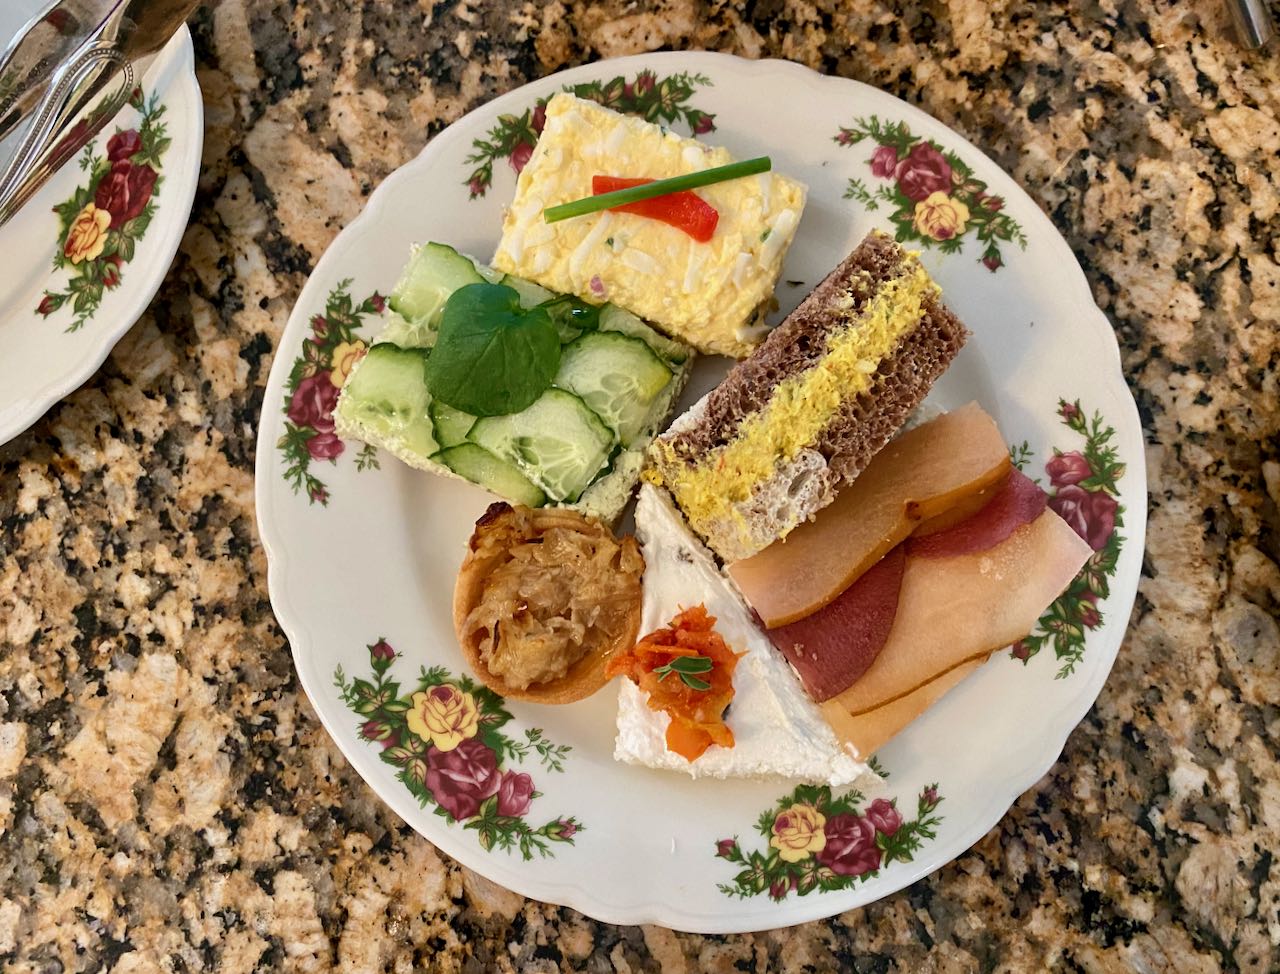 Sandwiches Afternoon Tea Disney’s Grand Floridian Resort & Spa Orlando review